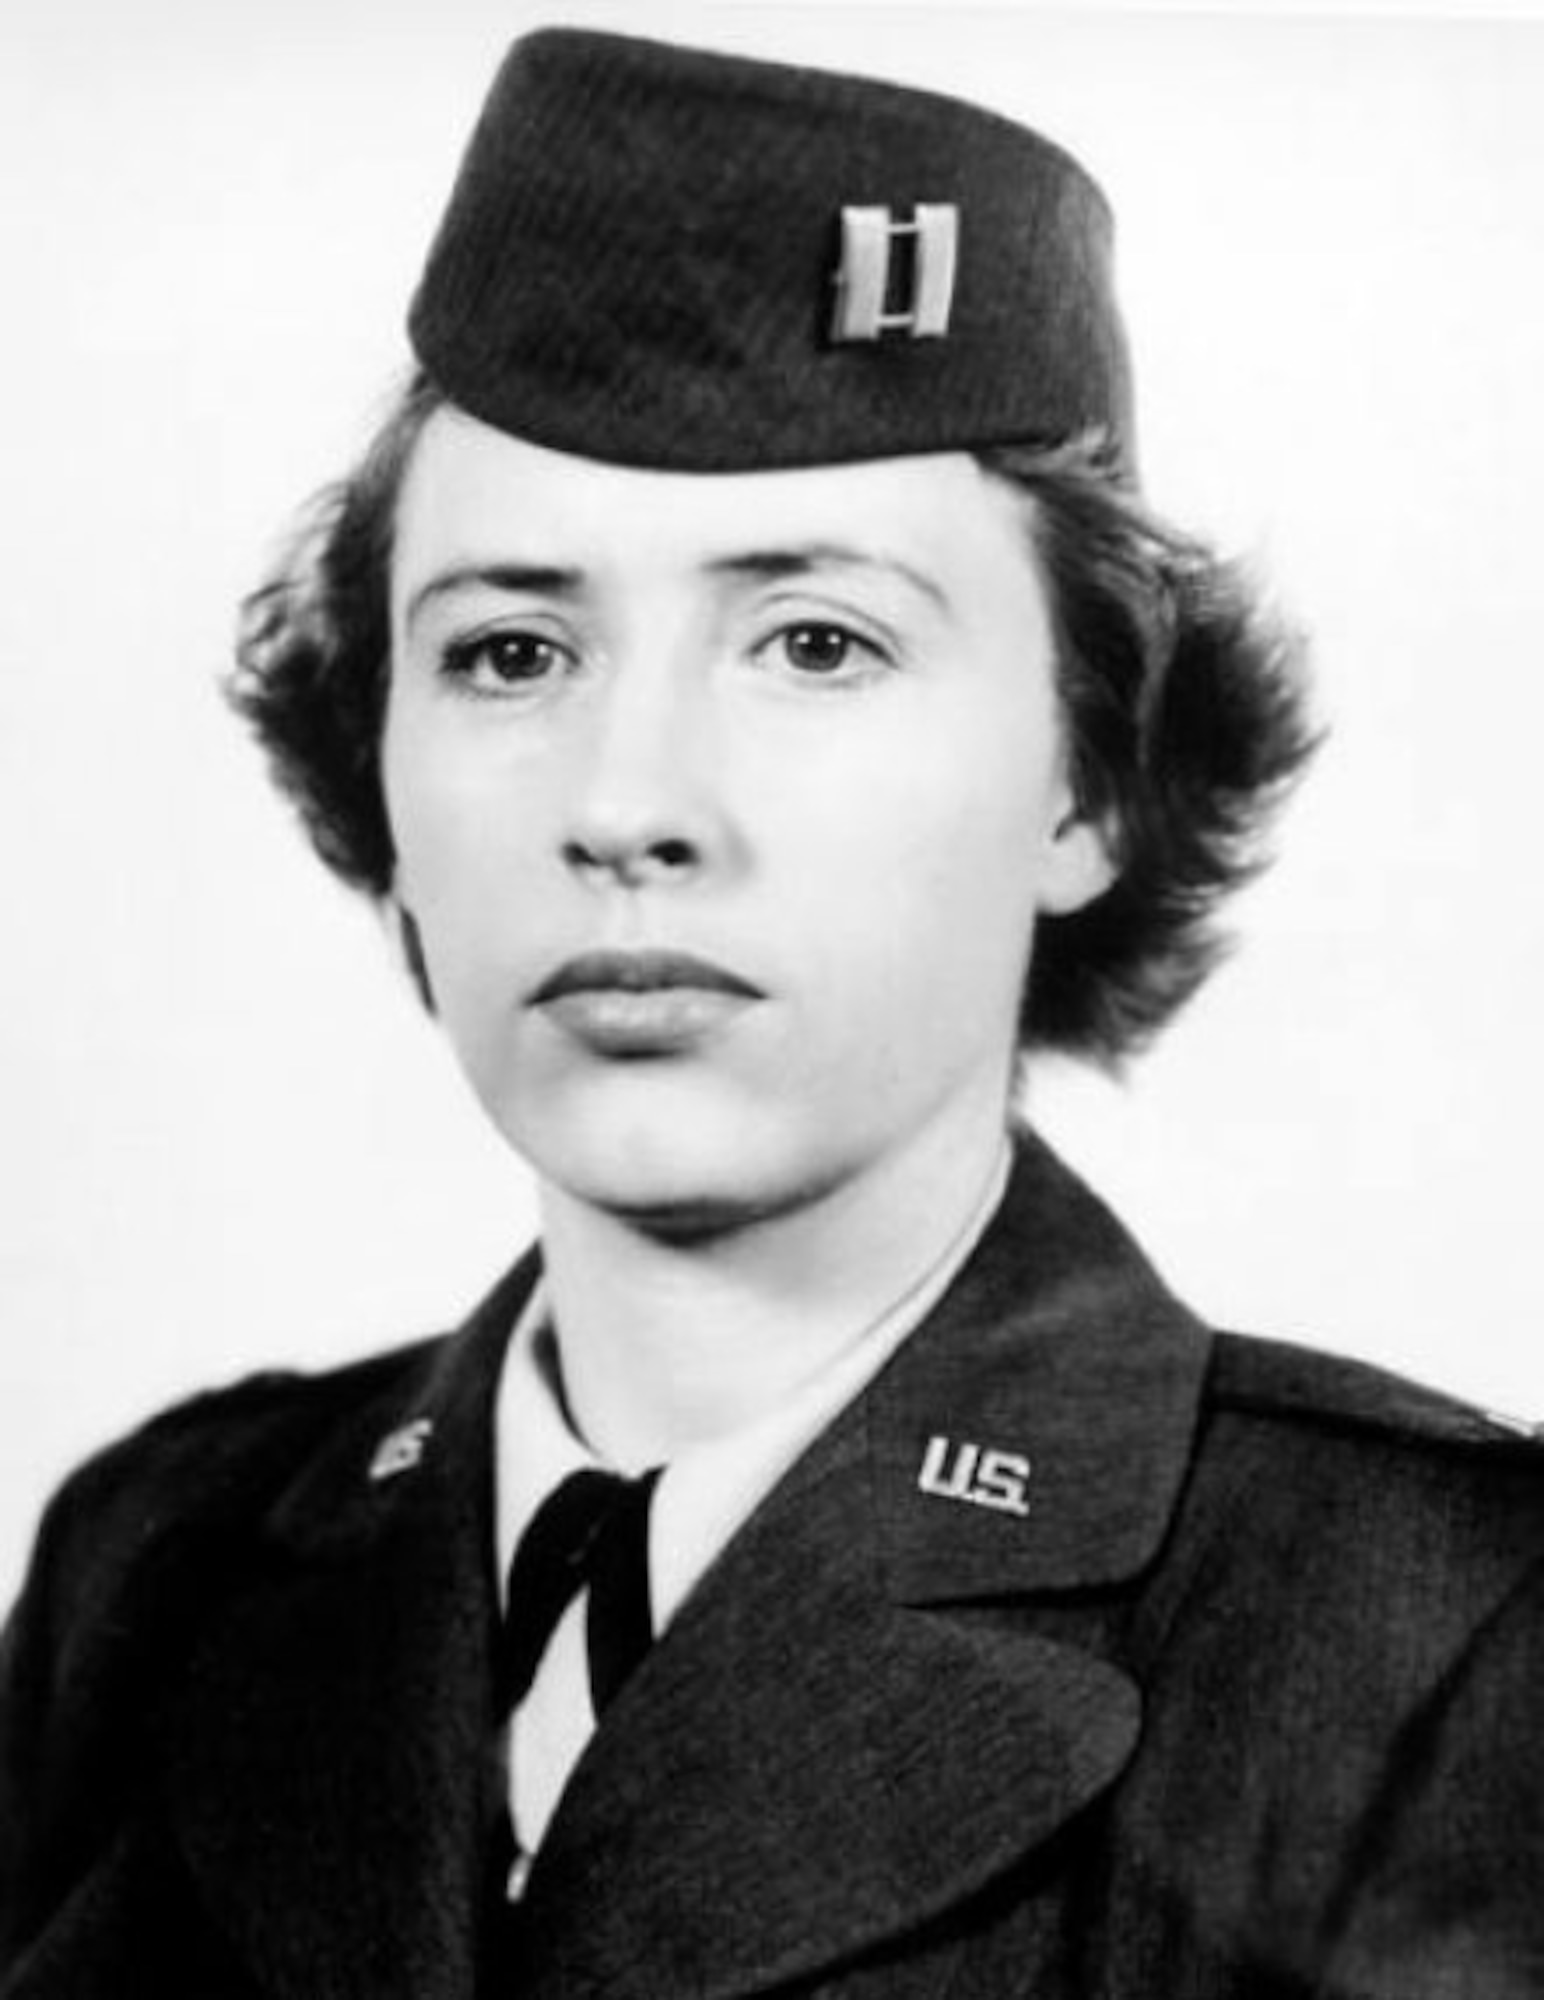 Maj. Gen. Jeanne Holm, pictured here as an Army company commander in 1948, was the first woman to attend the Air Command and Staff School at Maxwell Air Force Base, Ala., in 1949. Her awards include two Distinguished Service Medals and a Legion of Merit. (U.S. Army photo)